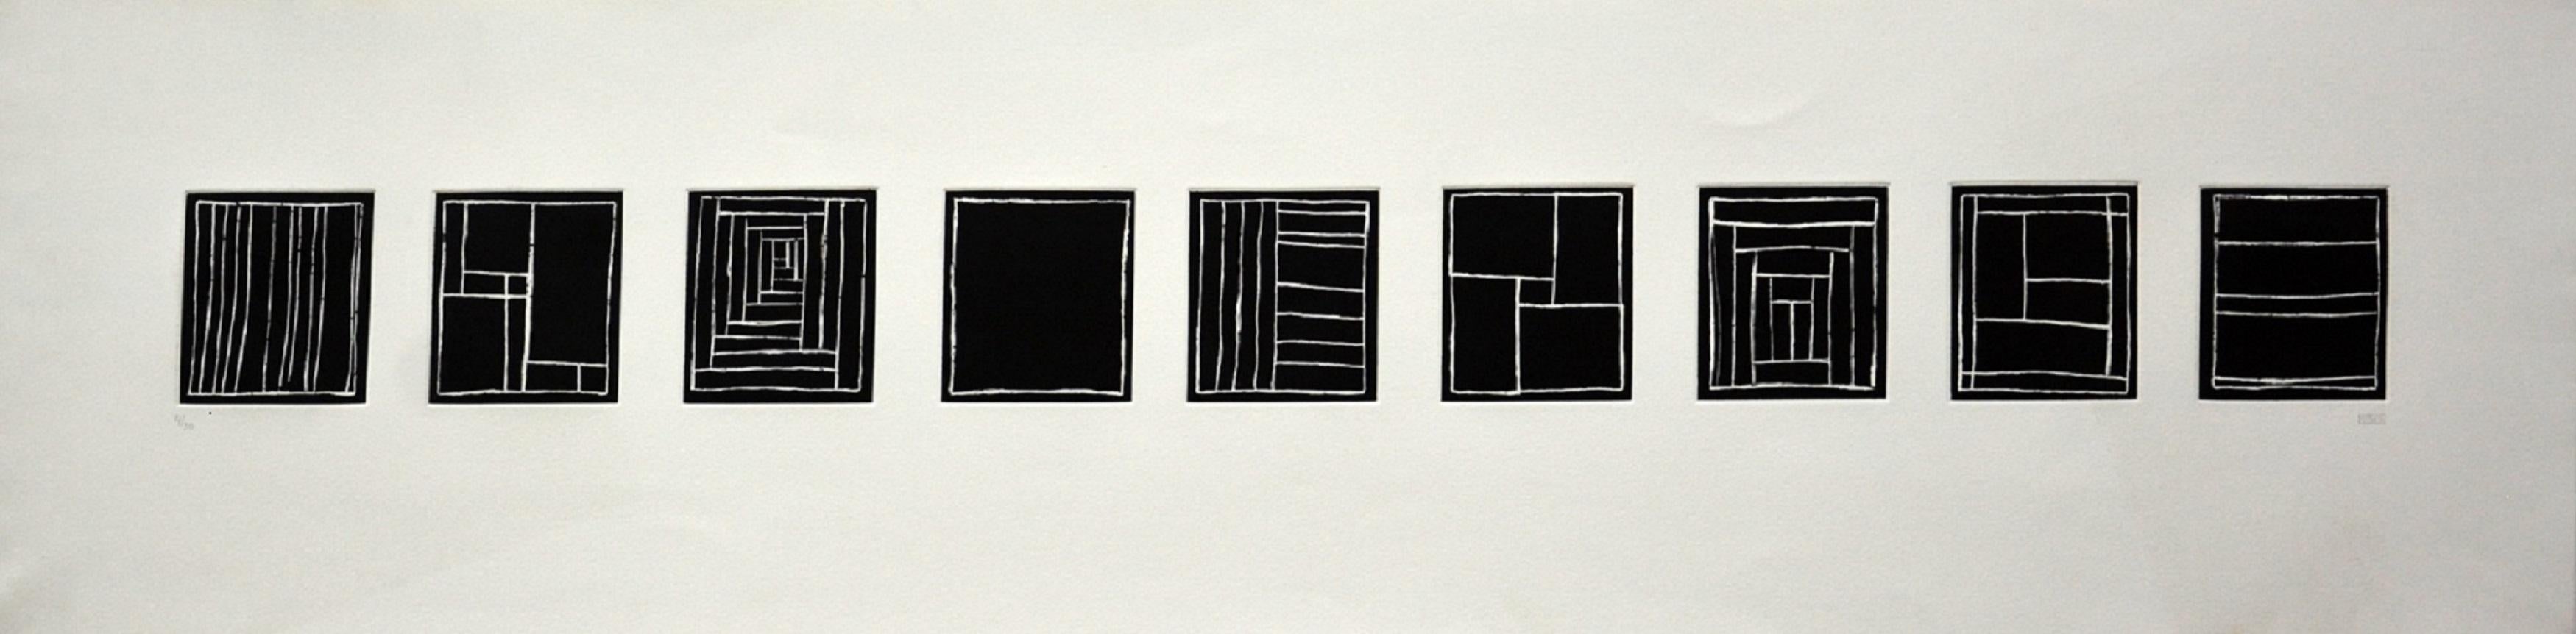 "Boris Viskin (Mexico, 1960)
'Untitled 1', 2015
woodcut on paper Velin Arches 300 g.
13.2 x 52.8 in. (33.5 x 134 cm.)
Edition of 30
ID: VIS-101"